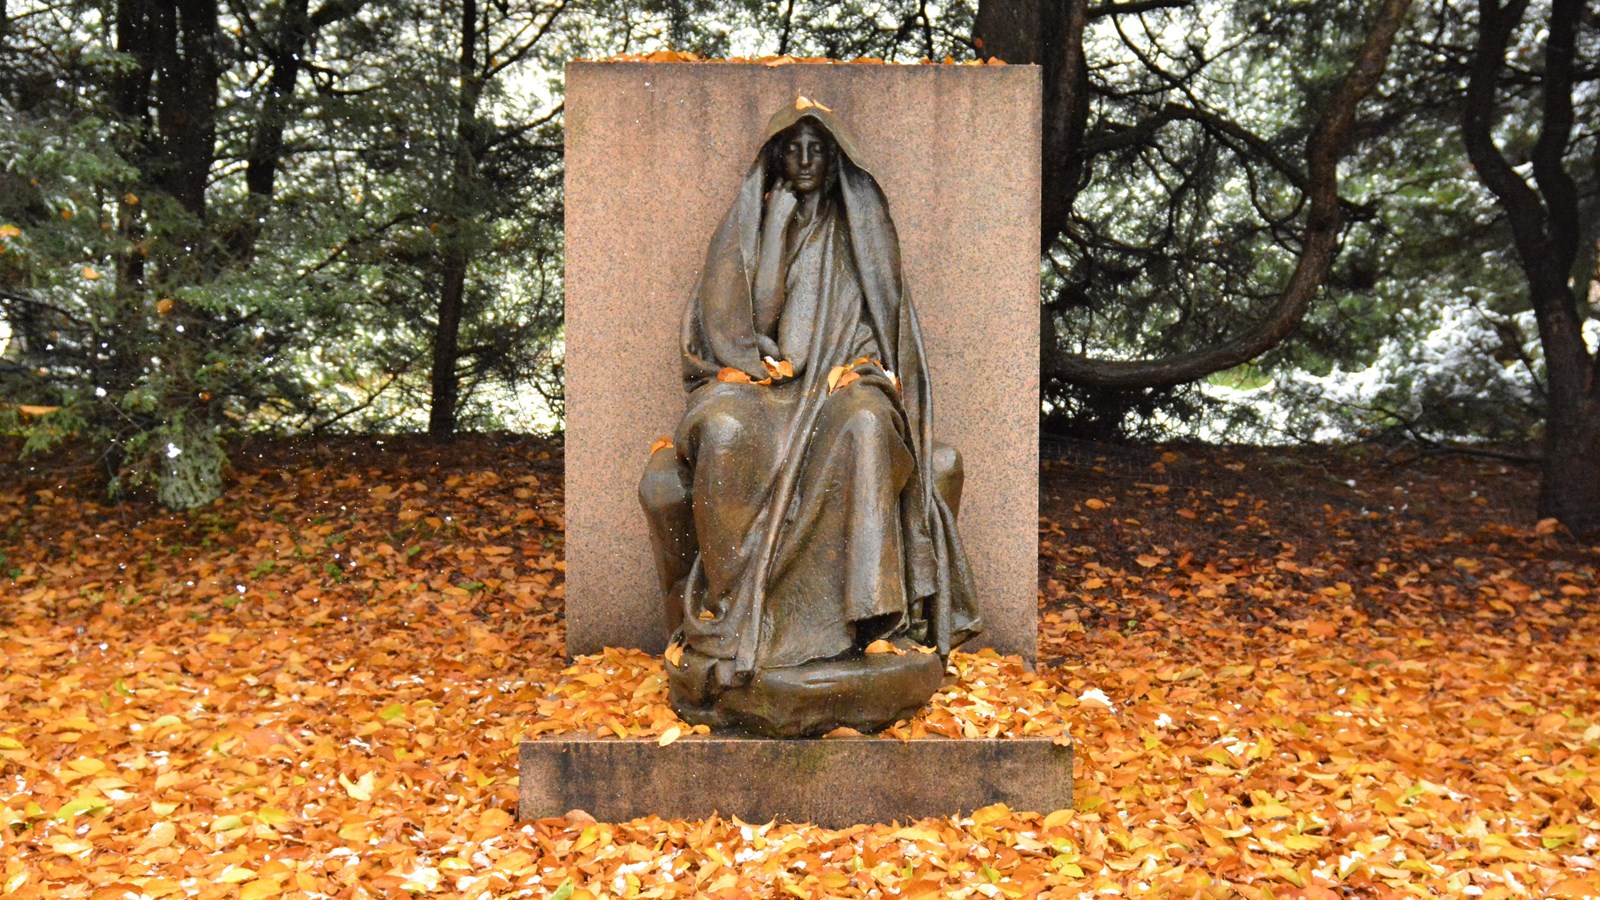 Adams Memorial with Golden Fall Leaves covering the ground